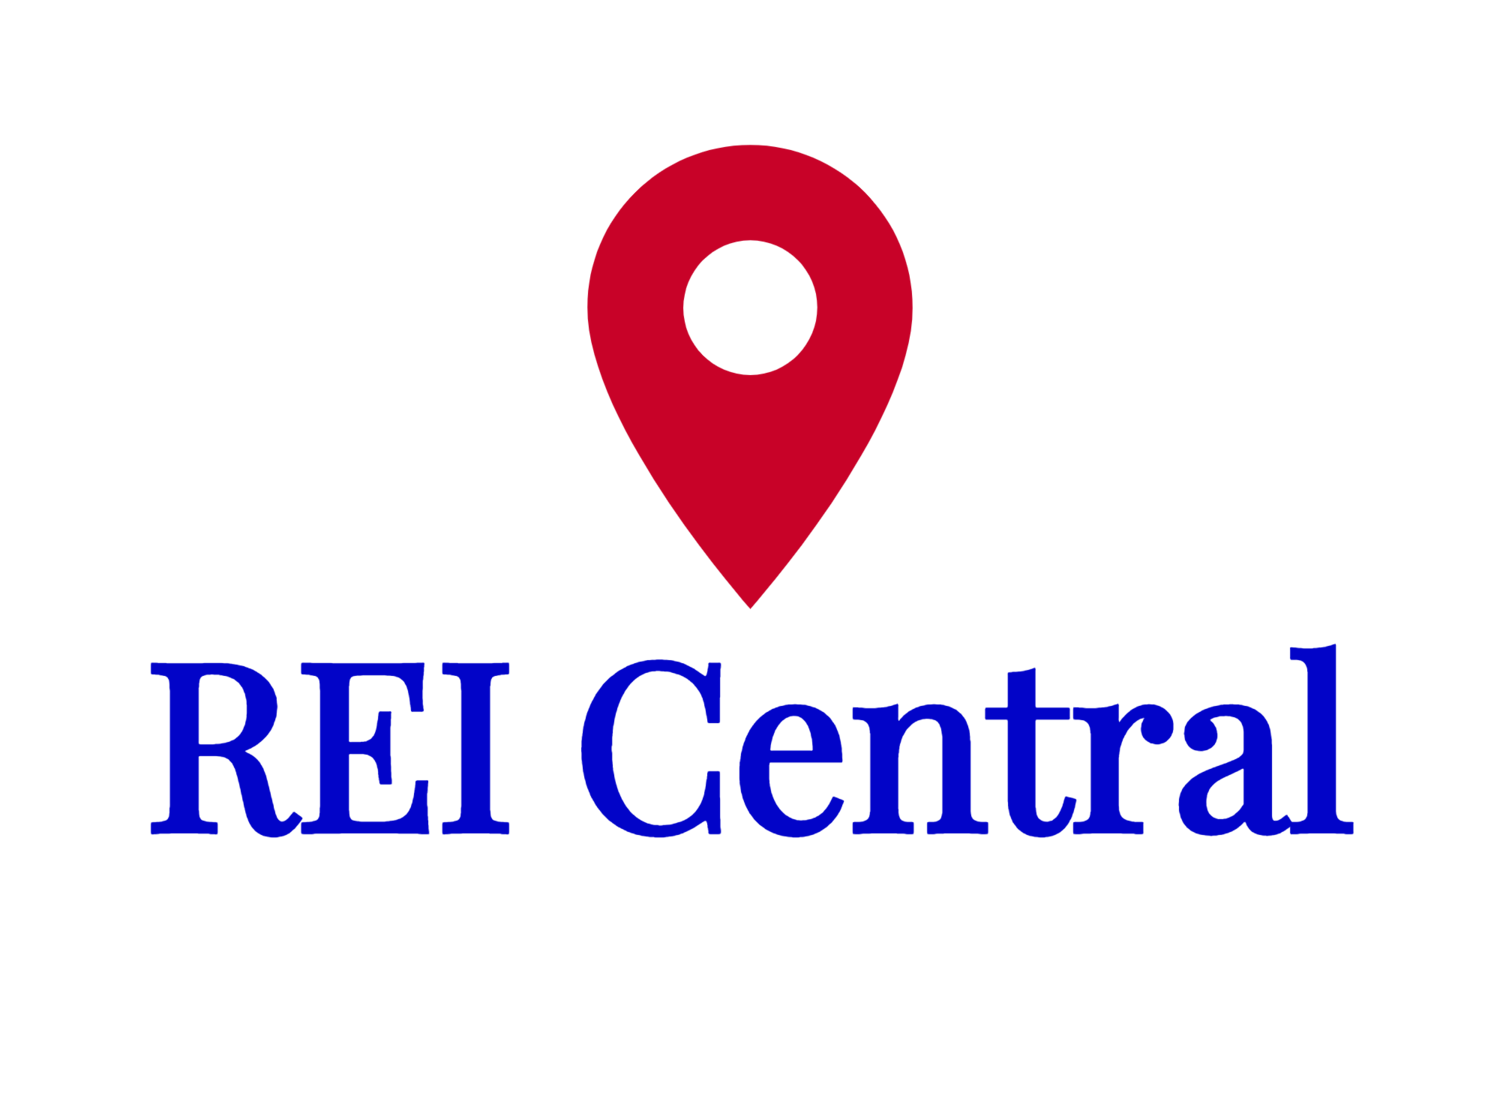 REI Central